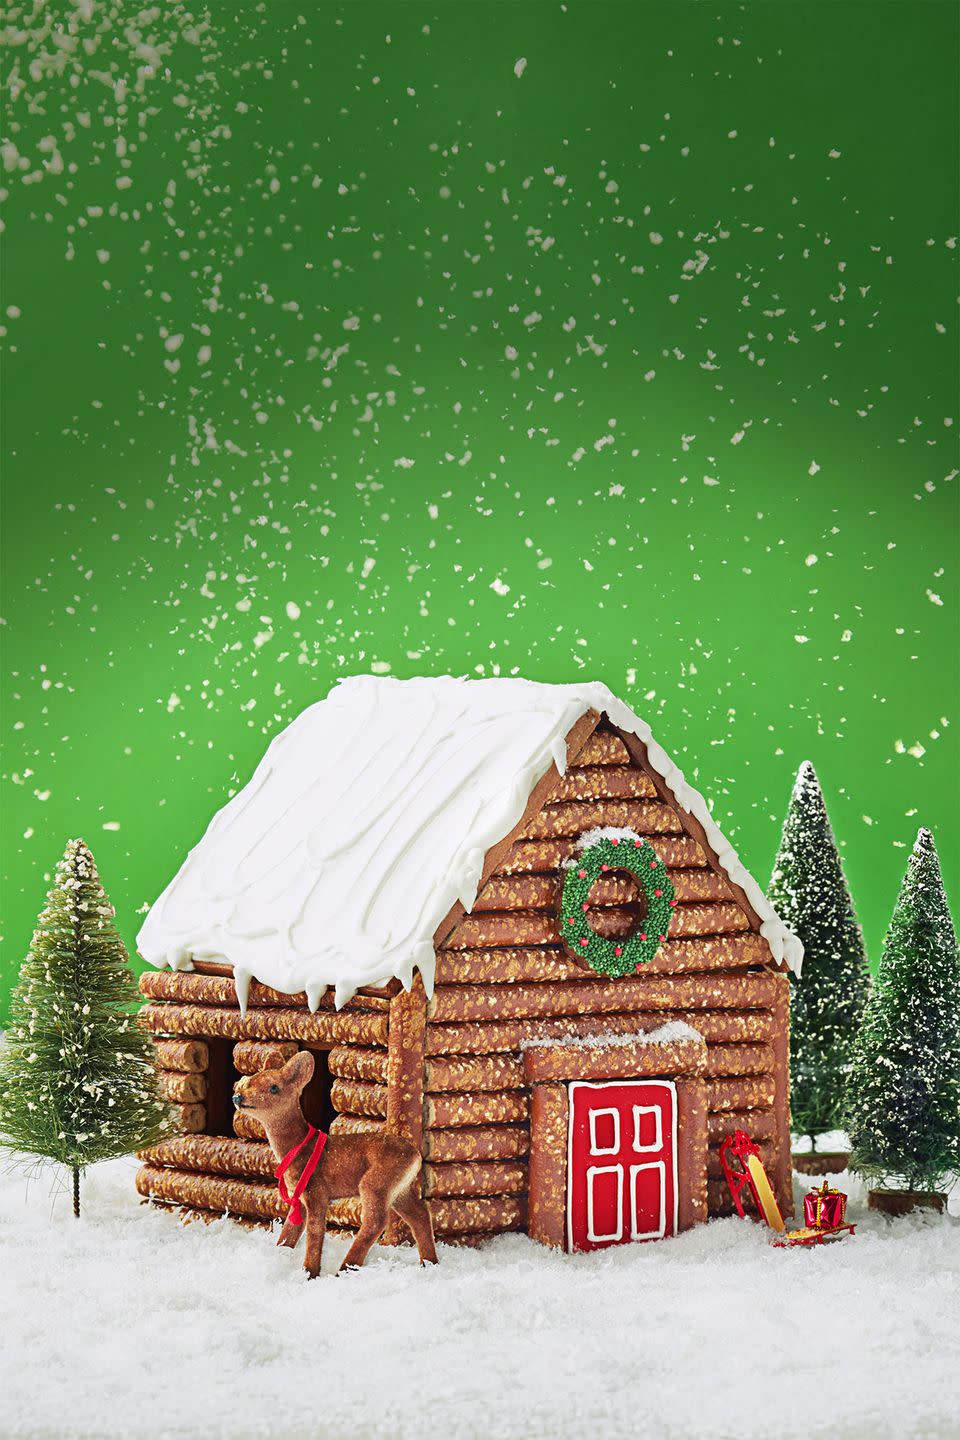 17) Build Memories One Gingerbread House at a Time